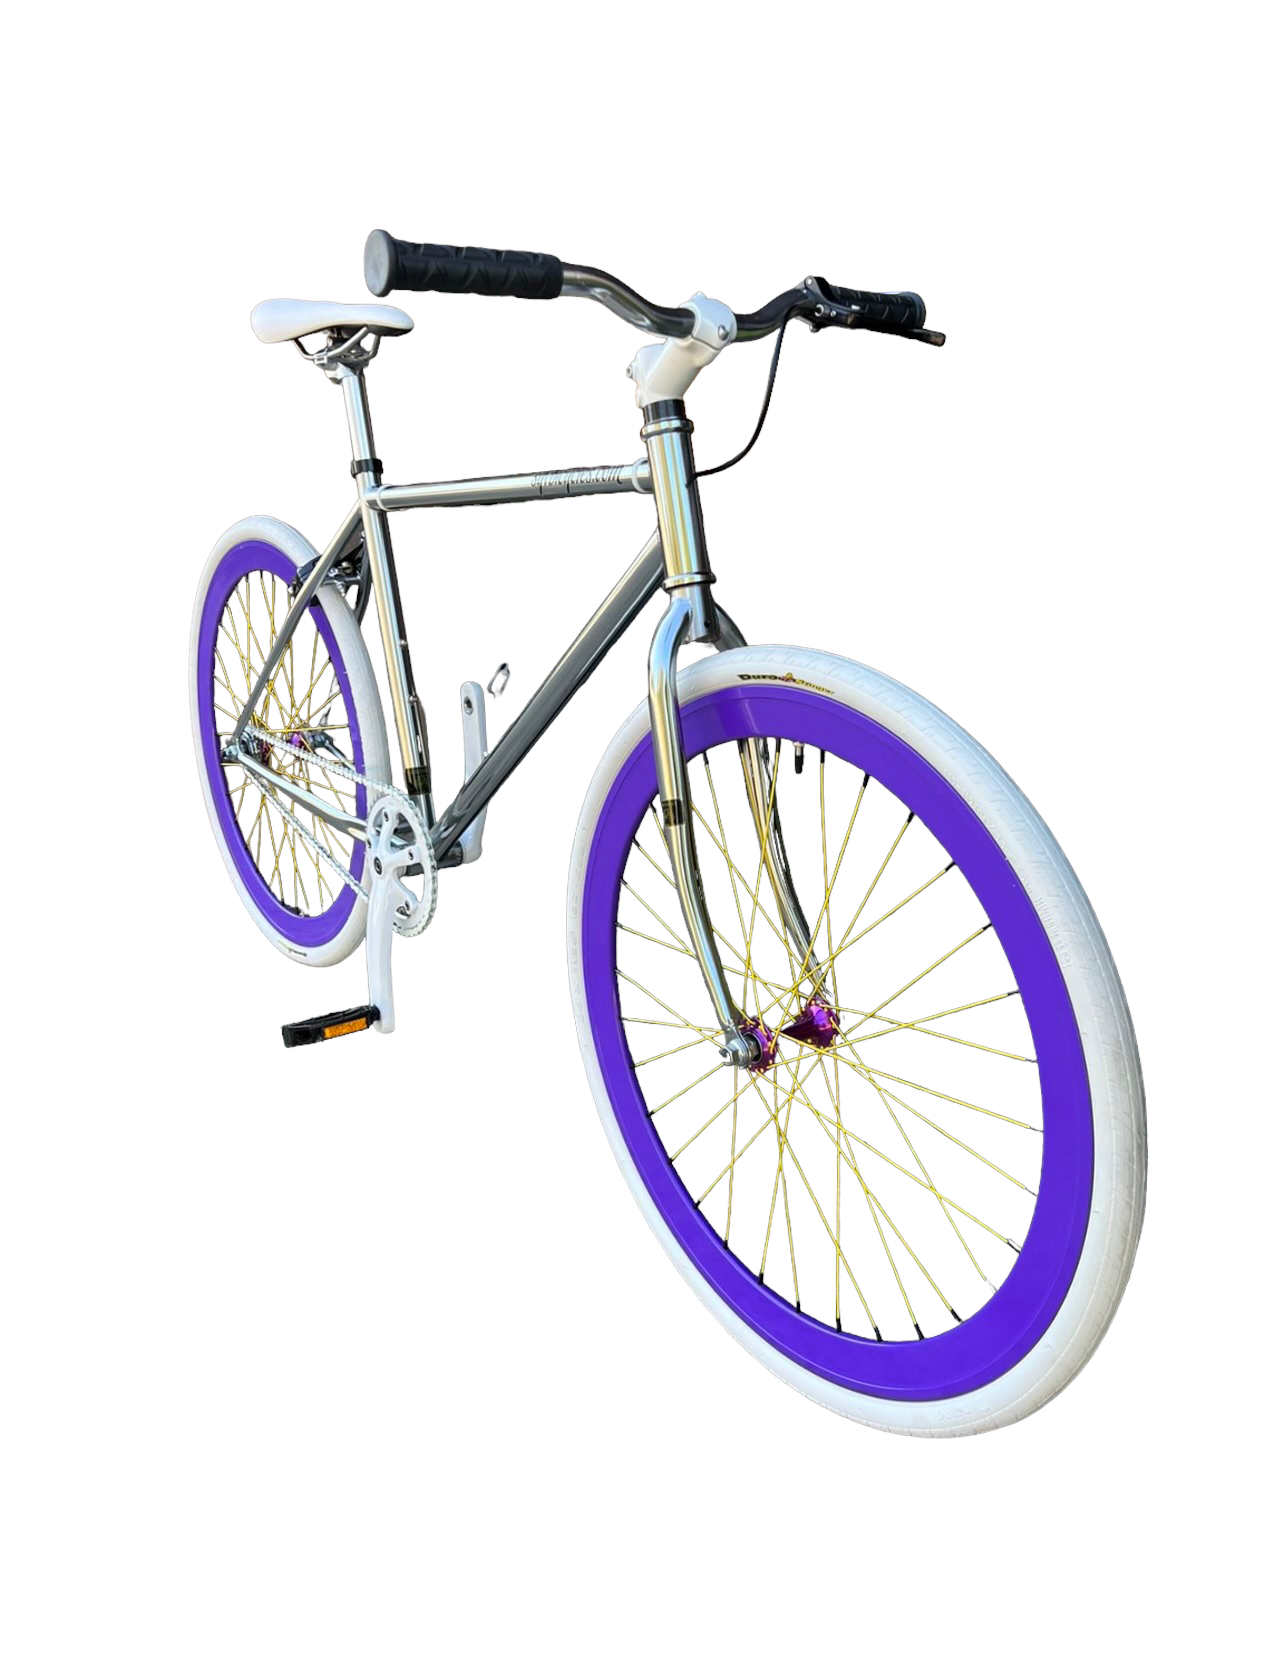 Sgvbicycles Custom Fixed Gear Single Speed Bike Chrome Purple Sgvbicycles 